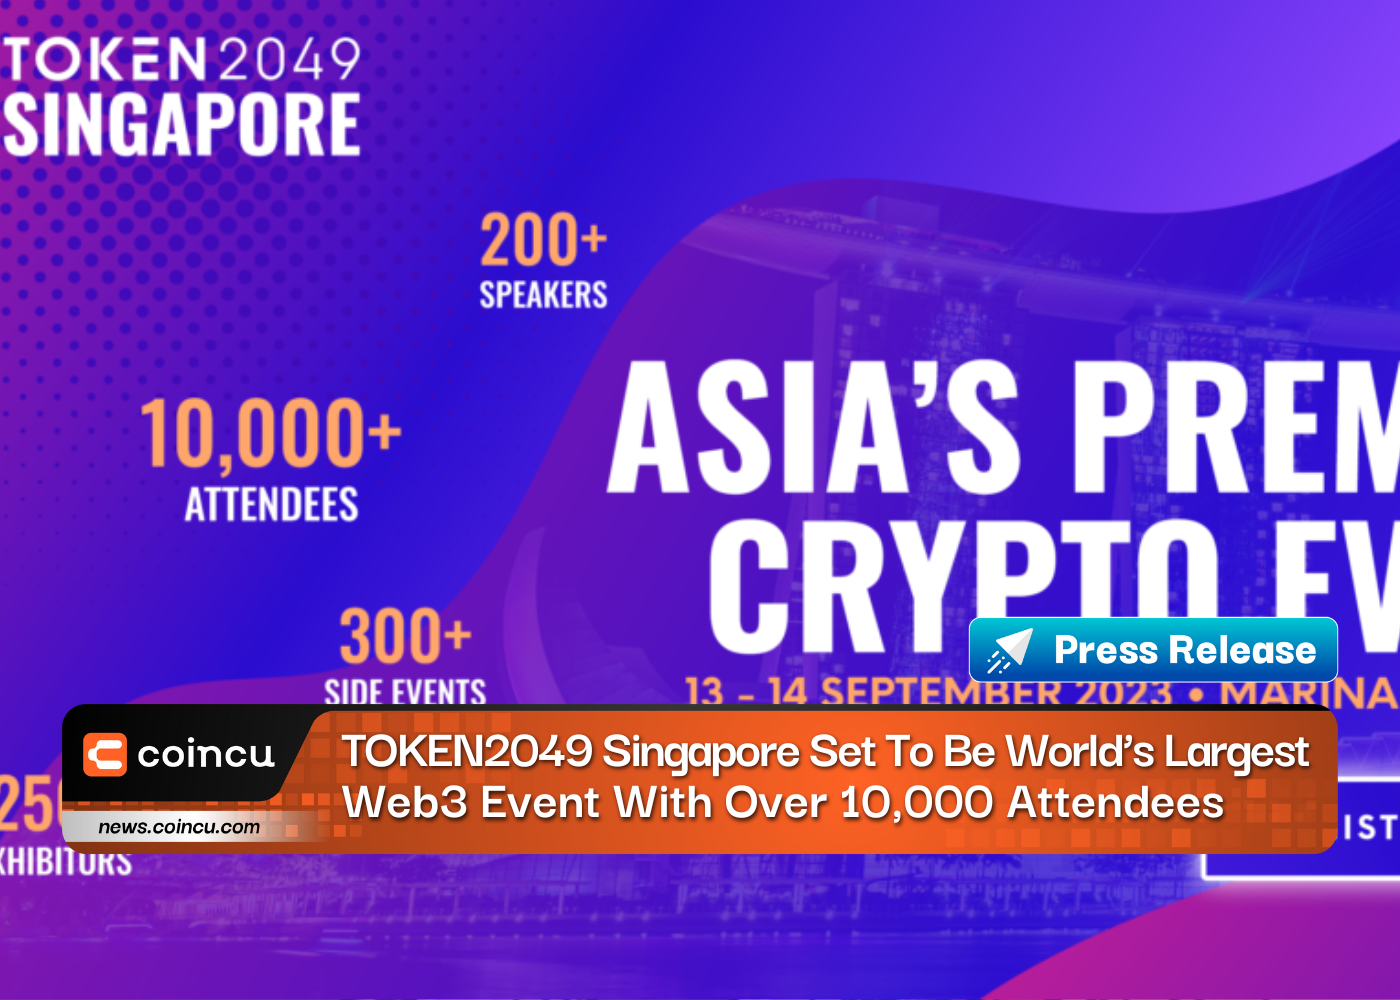 TOKEN2049 Singapore Set to Be World’s Largest Web3 Event With Over 10,000 Attendees 